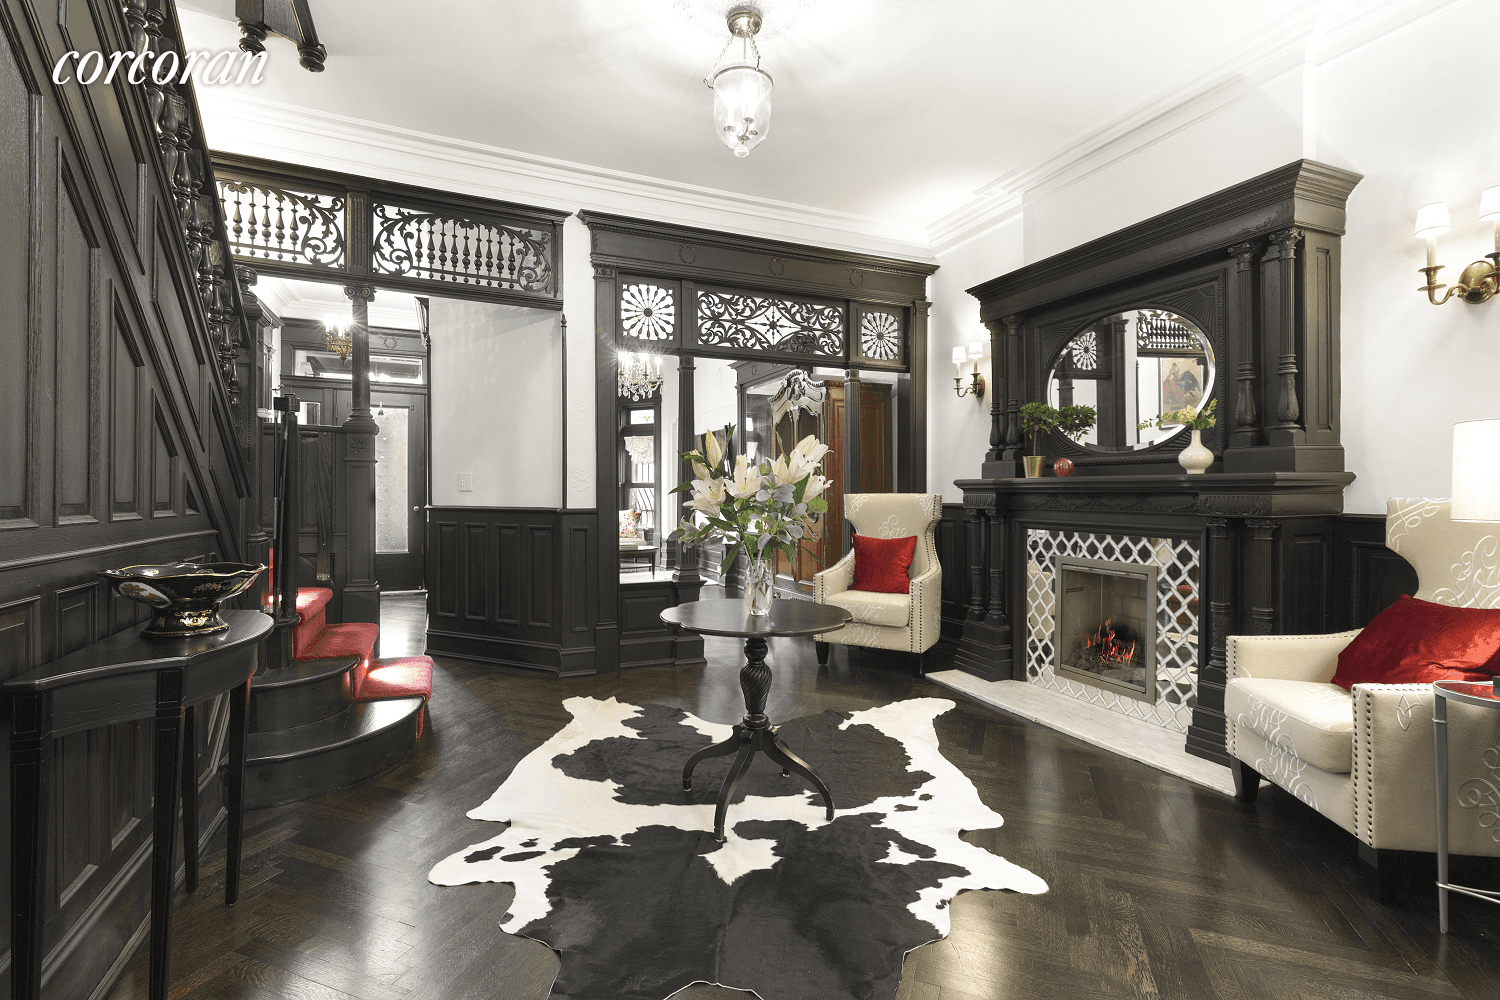 This spectacular 2 family townhouse, built circa 1900 and meticulously restored and renovated to perfection with all the modern bells and whistles, is a residence of true distinction at a ...